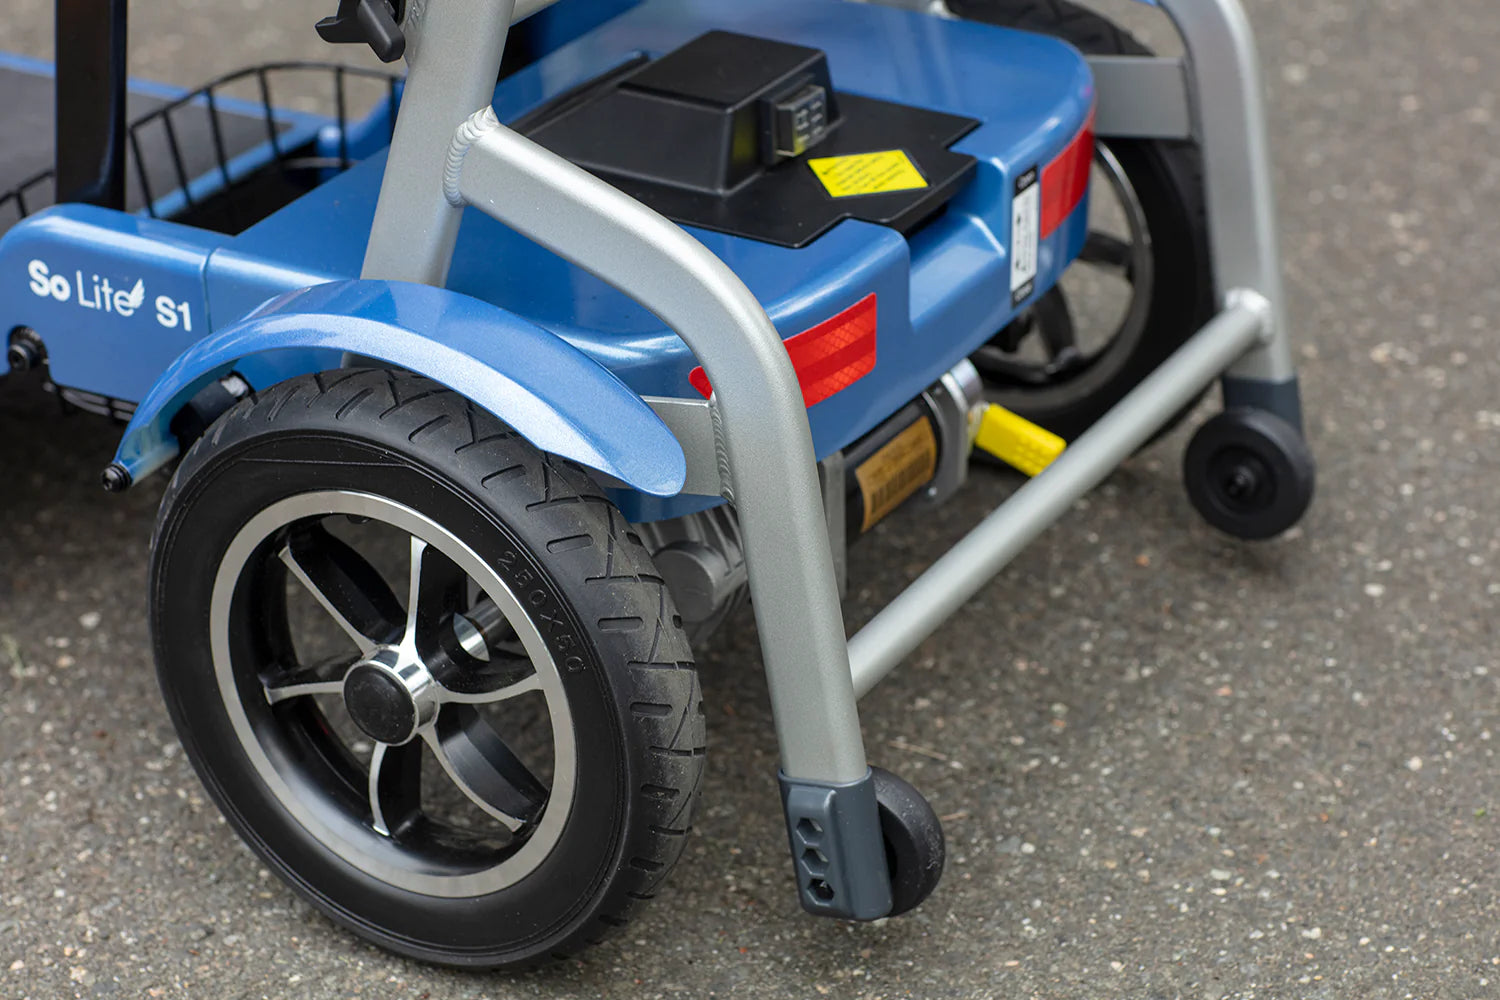 Journey So Lite Lightweight Folding Power Scooter anti-tippers